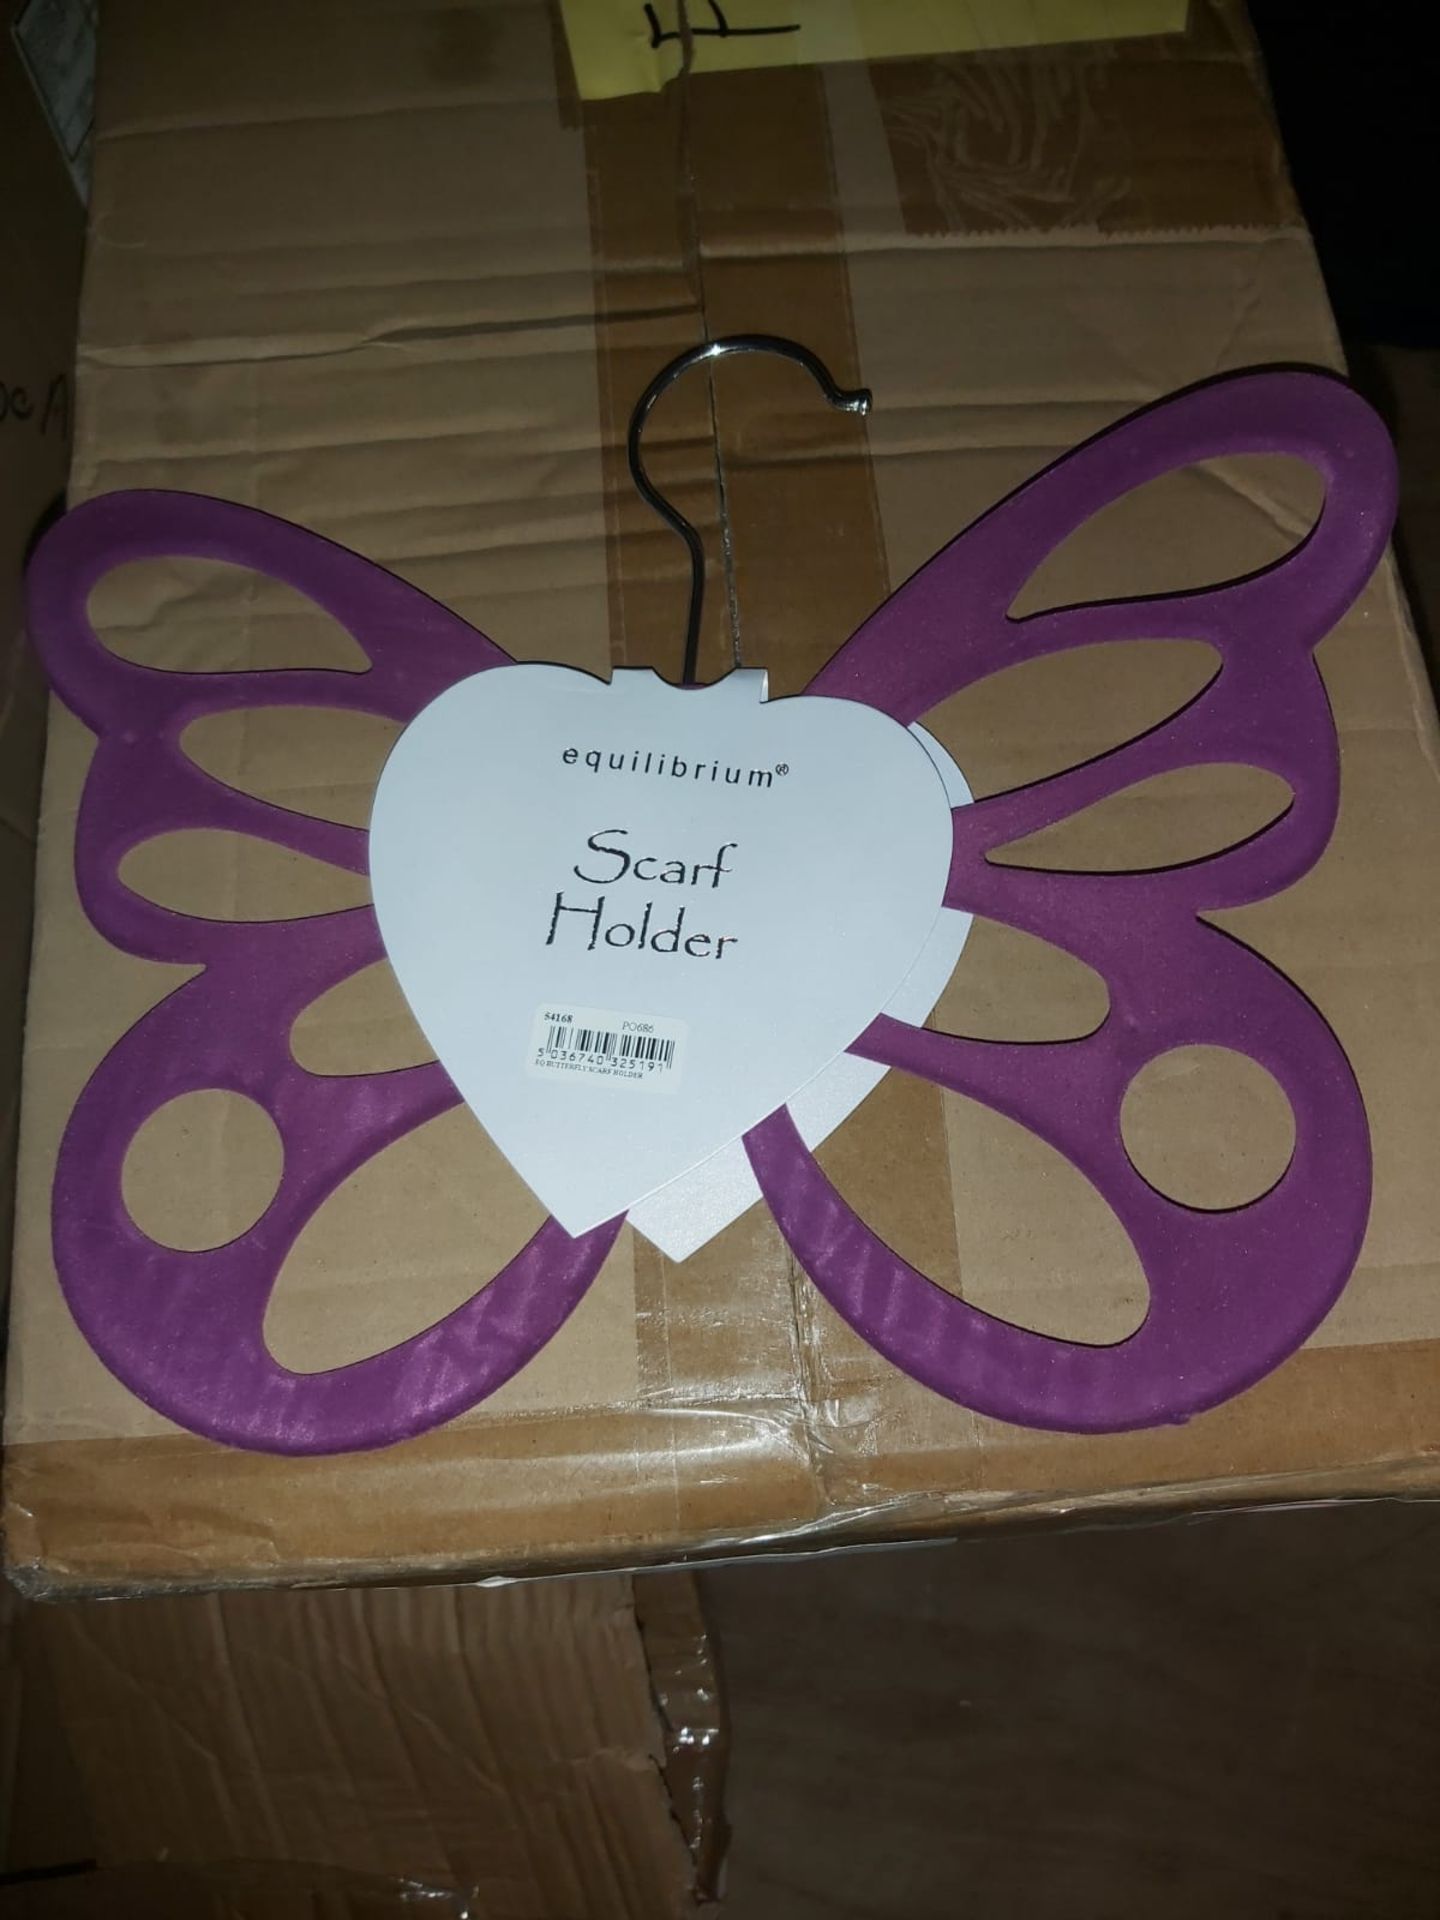 Equilibrium Velvet Butterfly scarf hangers over 300 job lot - Image 2 of 5